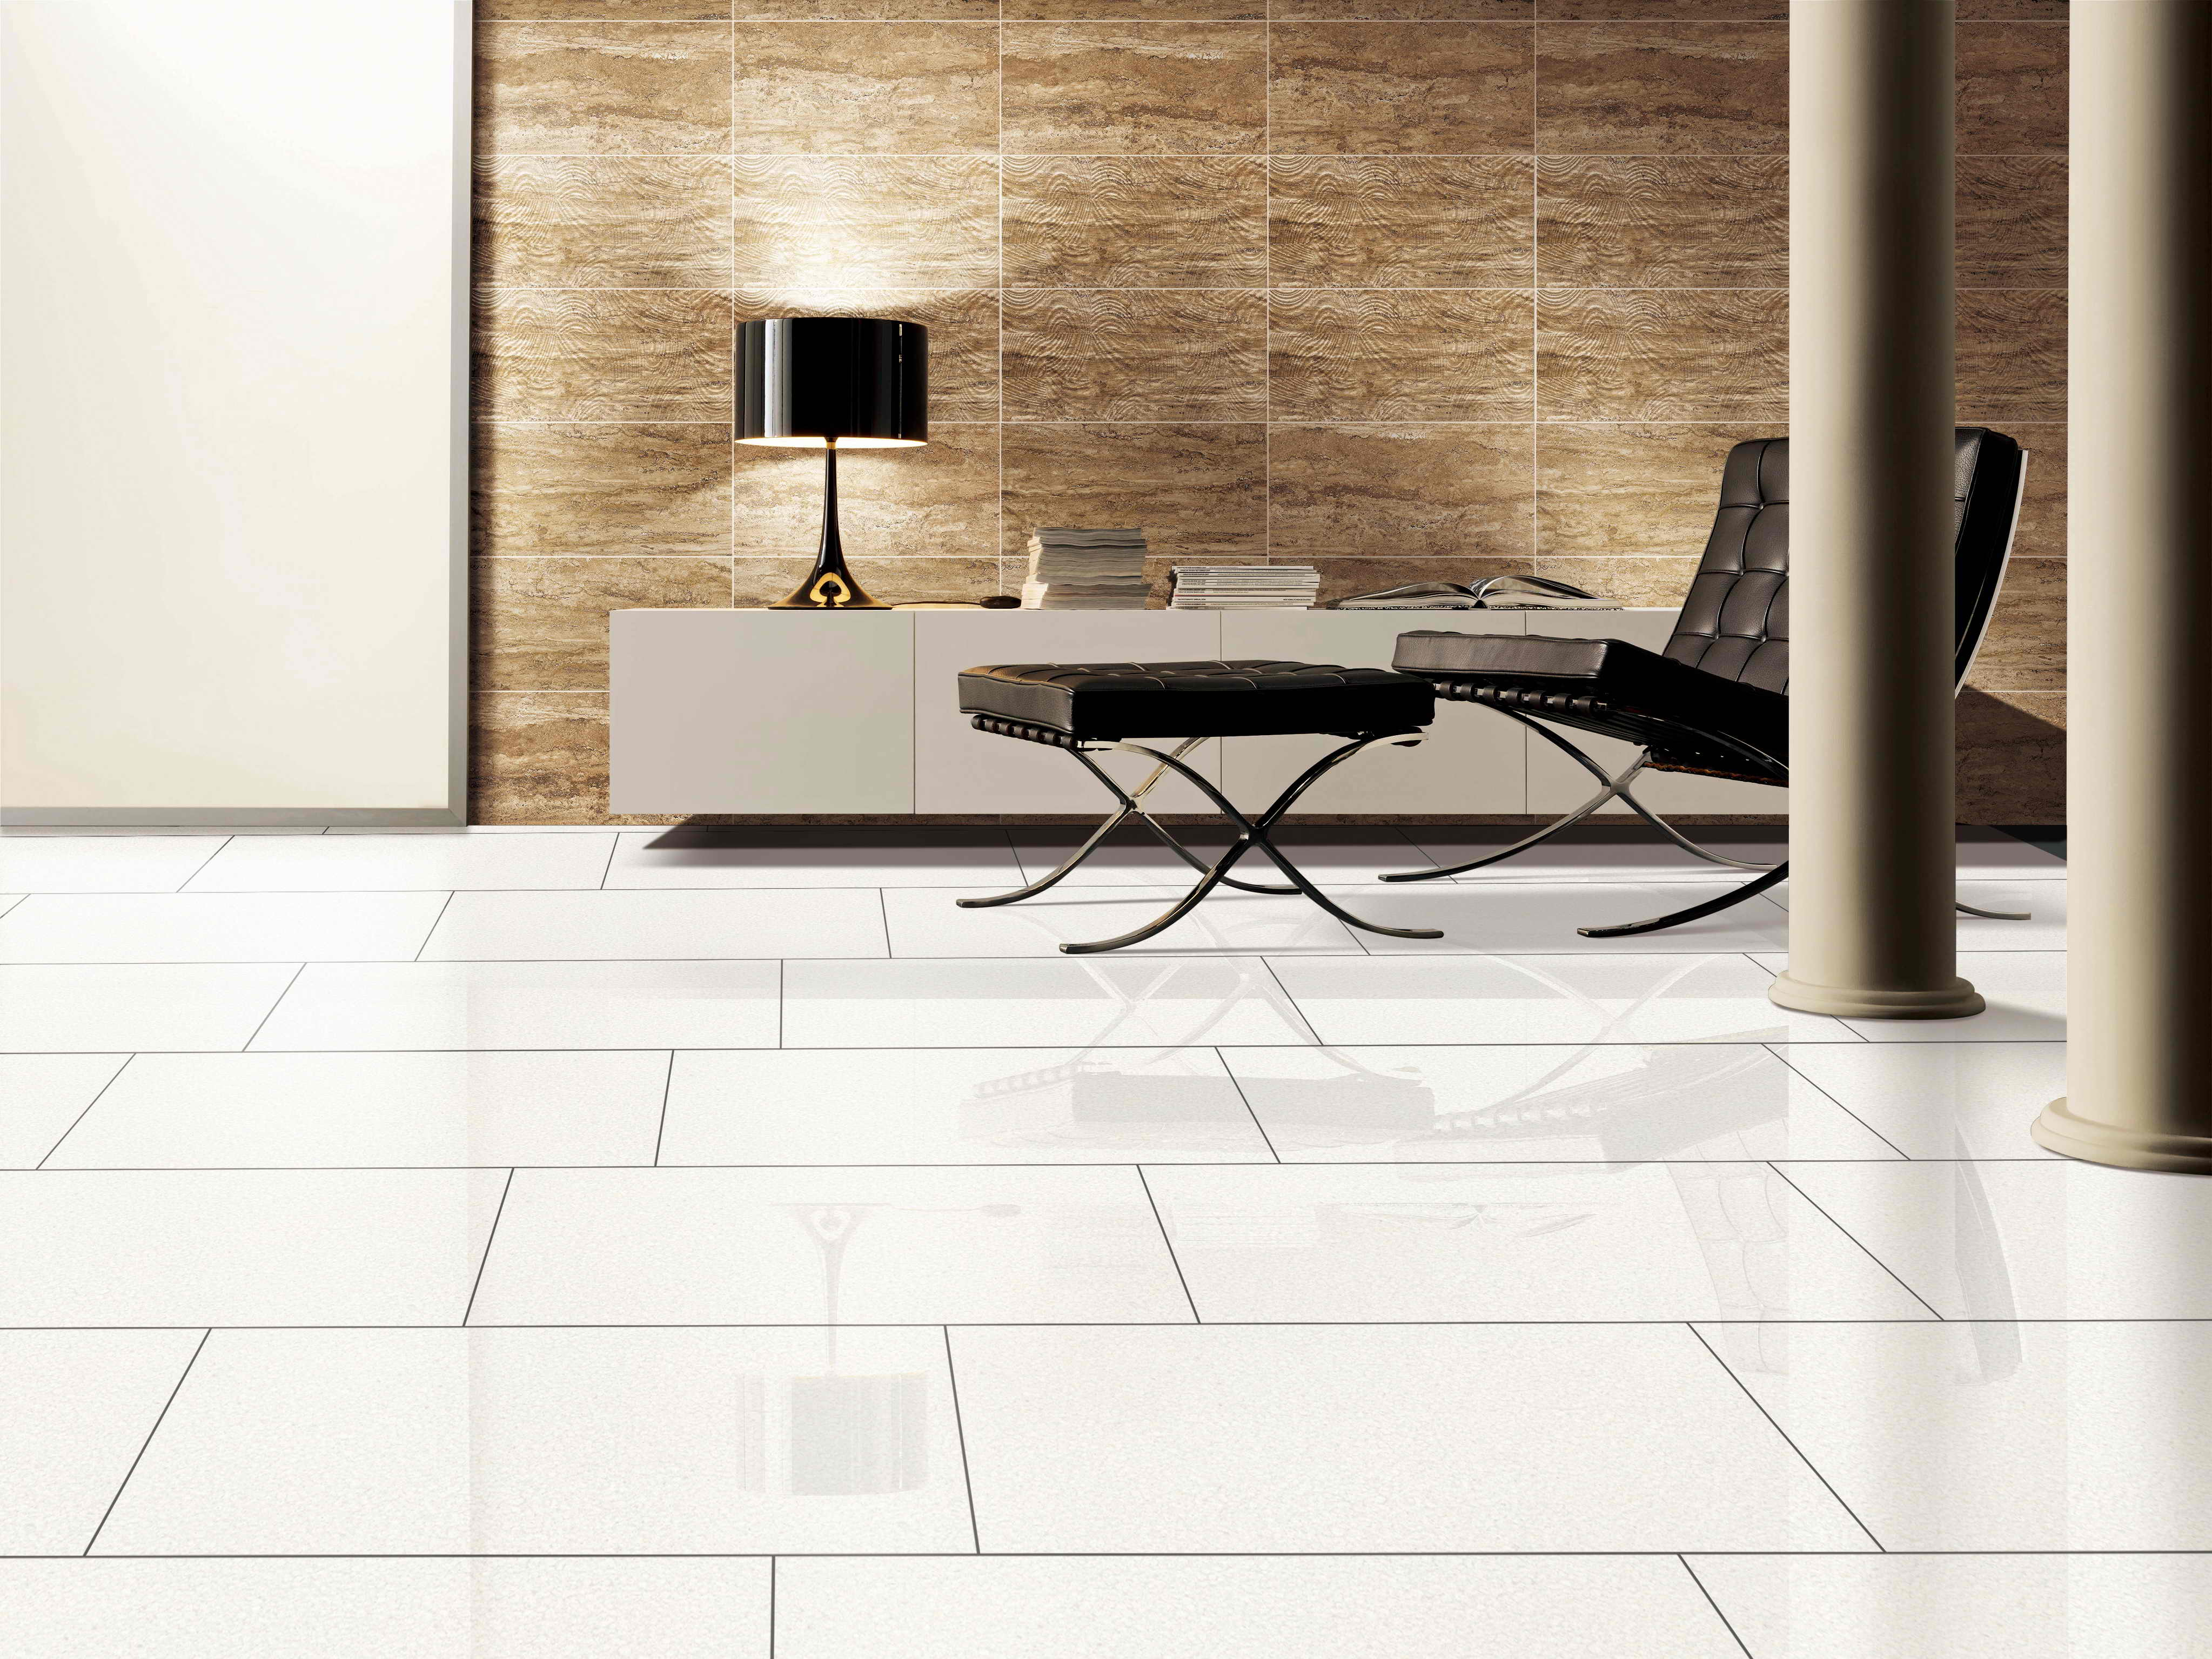 Gallery 1 How much porcelain or ceramic should we buy?  floor design picture, tile picture, porcelain tile picture, flooring picture, ceramic floor picture, stone floor picture